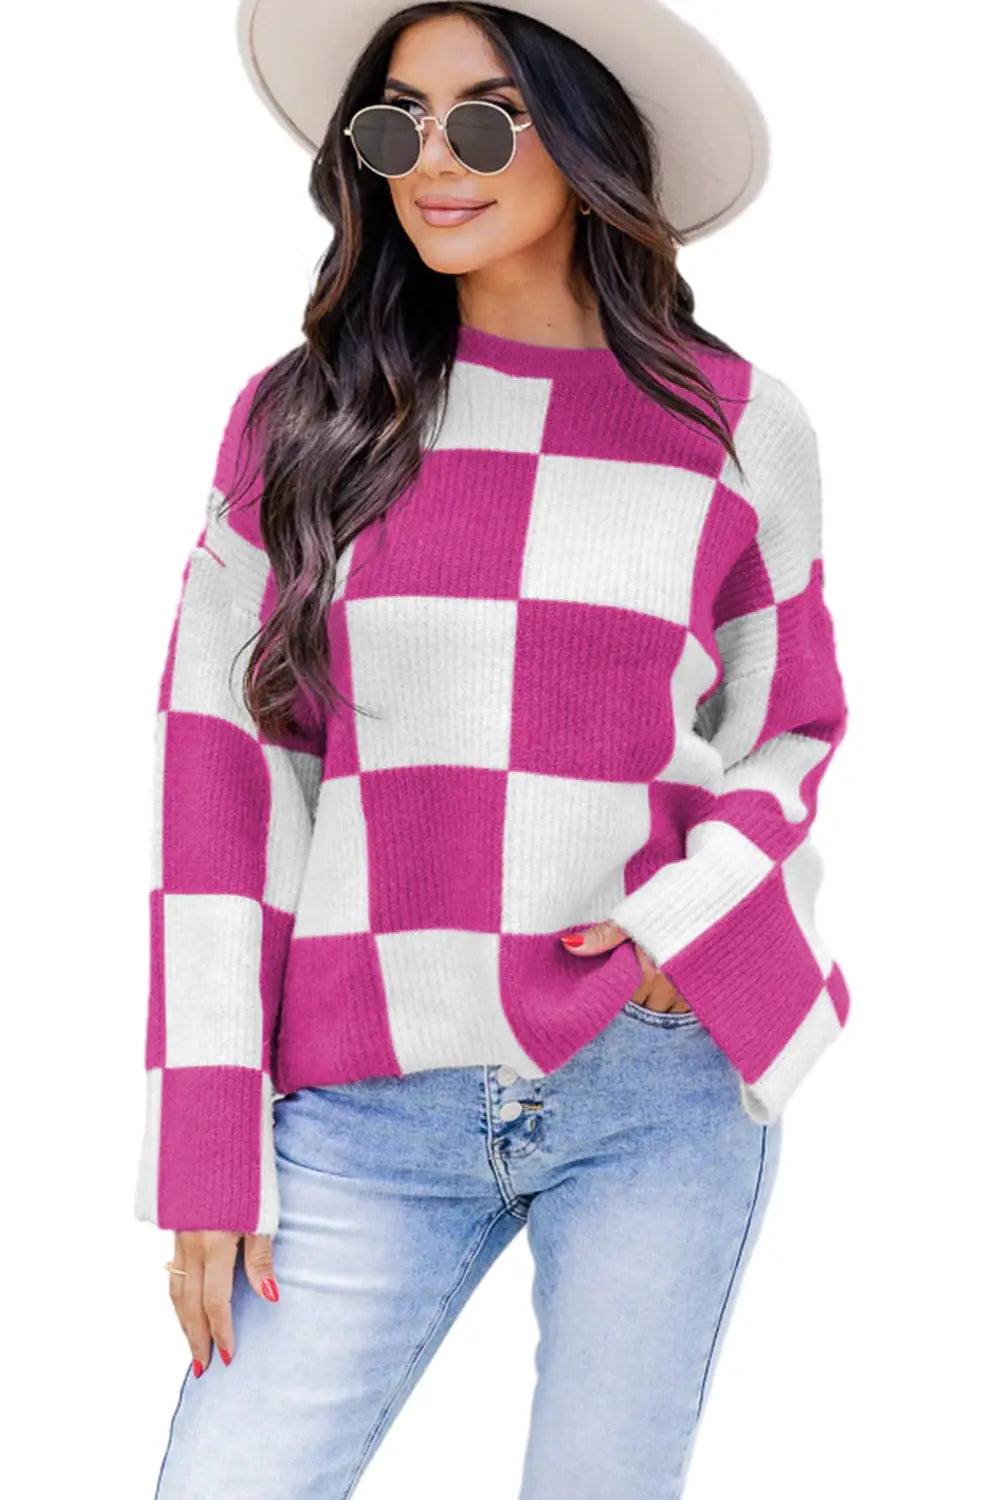 Bright pink checkered round neck baggy sweater - tops